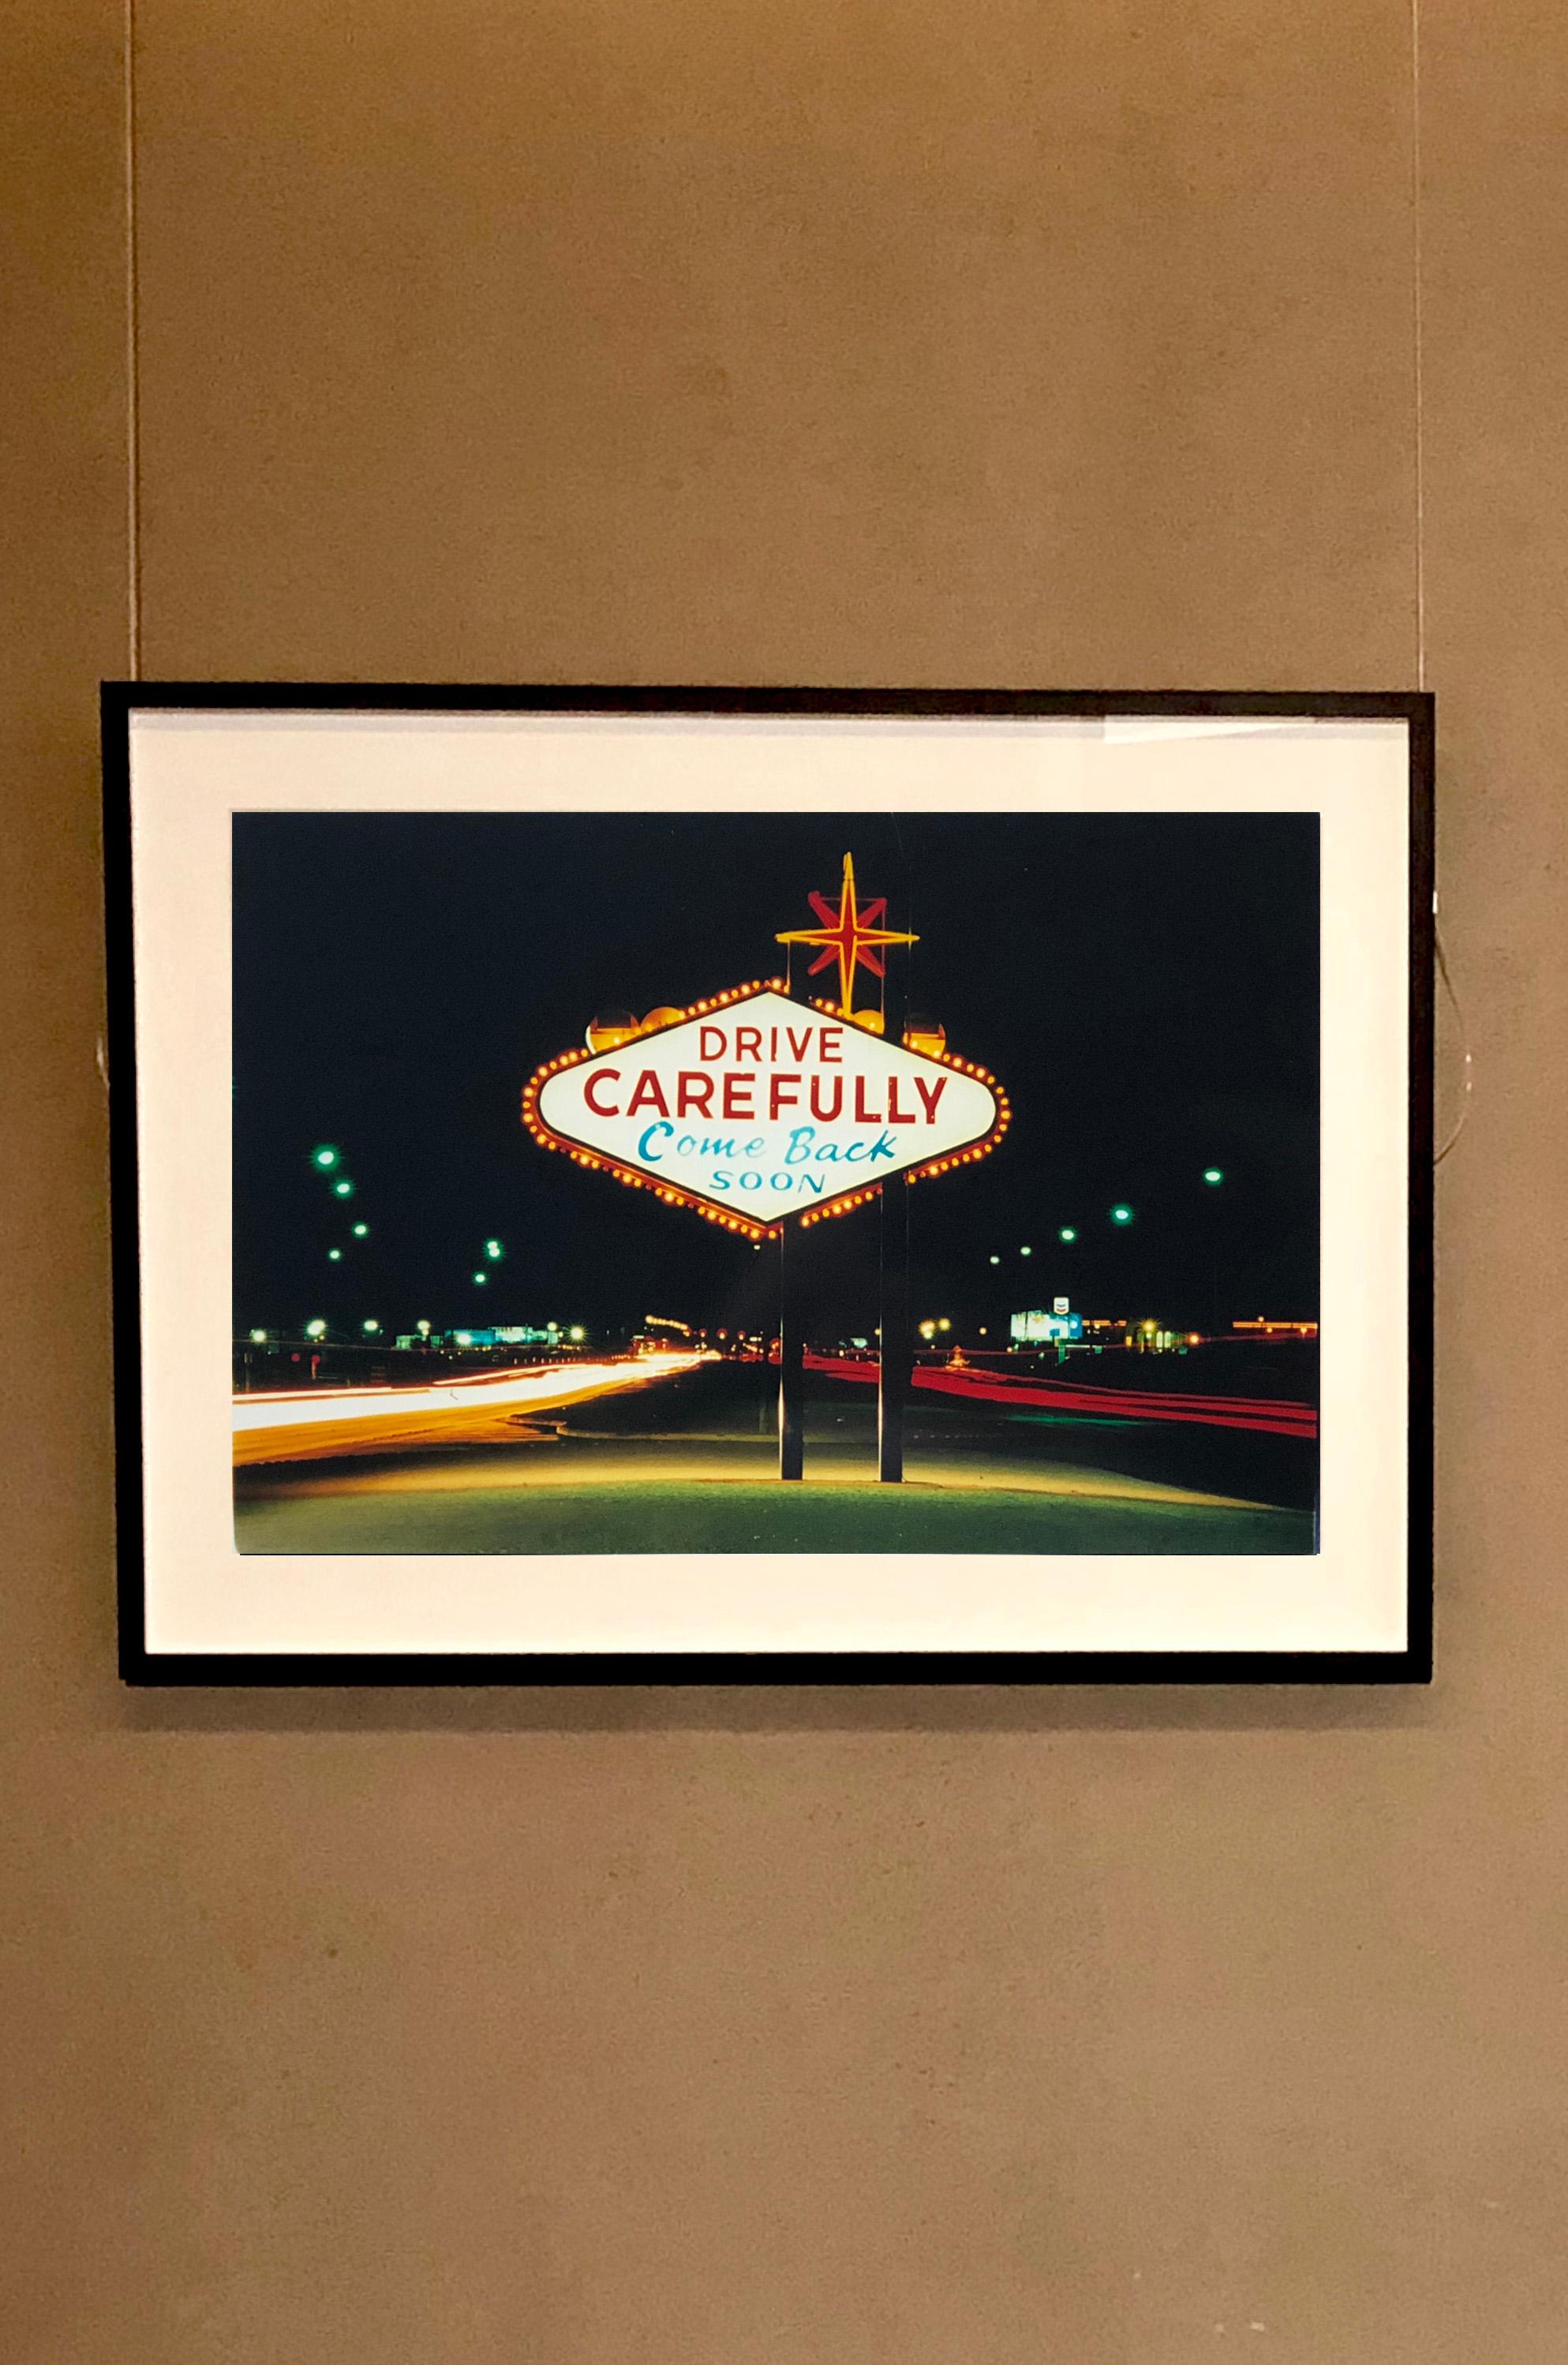 Part of Richard Heeps 'Dream in Colour' Series, here has captured an iconic American sign, with the wonderful sentiment 'Drive Carefully'.

This artwork is a limited edition of 25, gloss photographic print. Accompanied by a signed and numbered